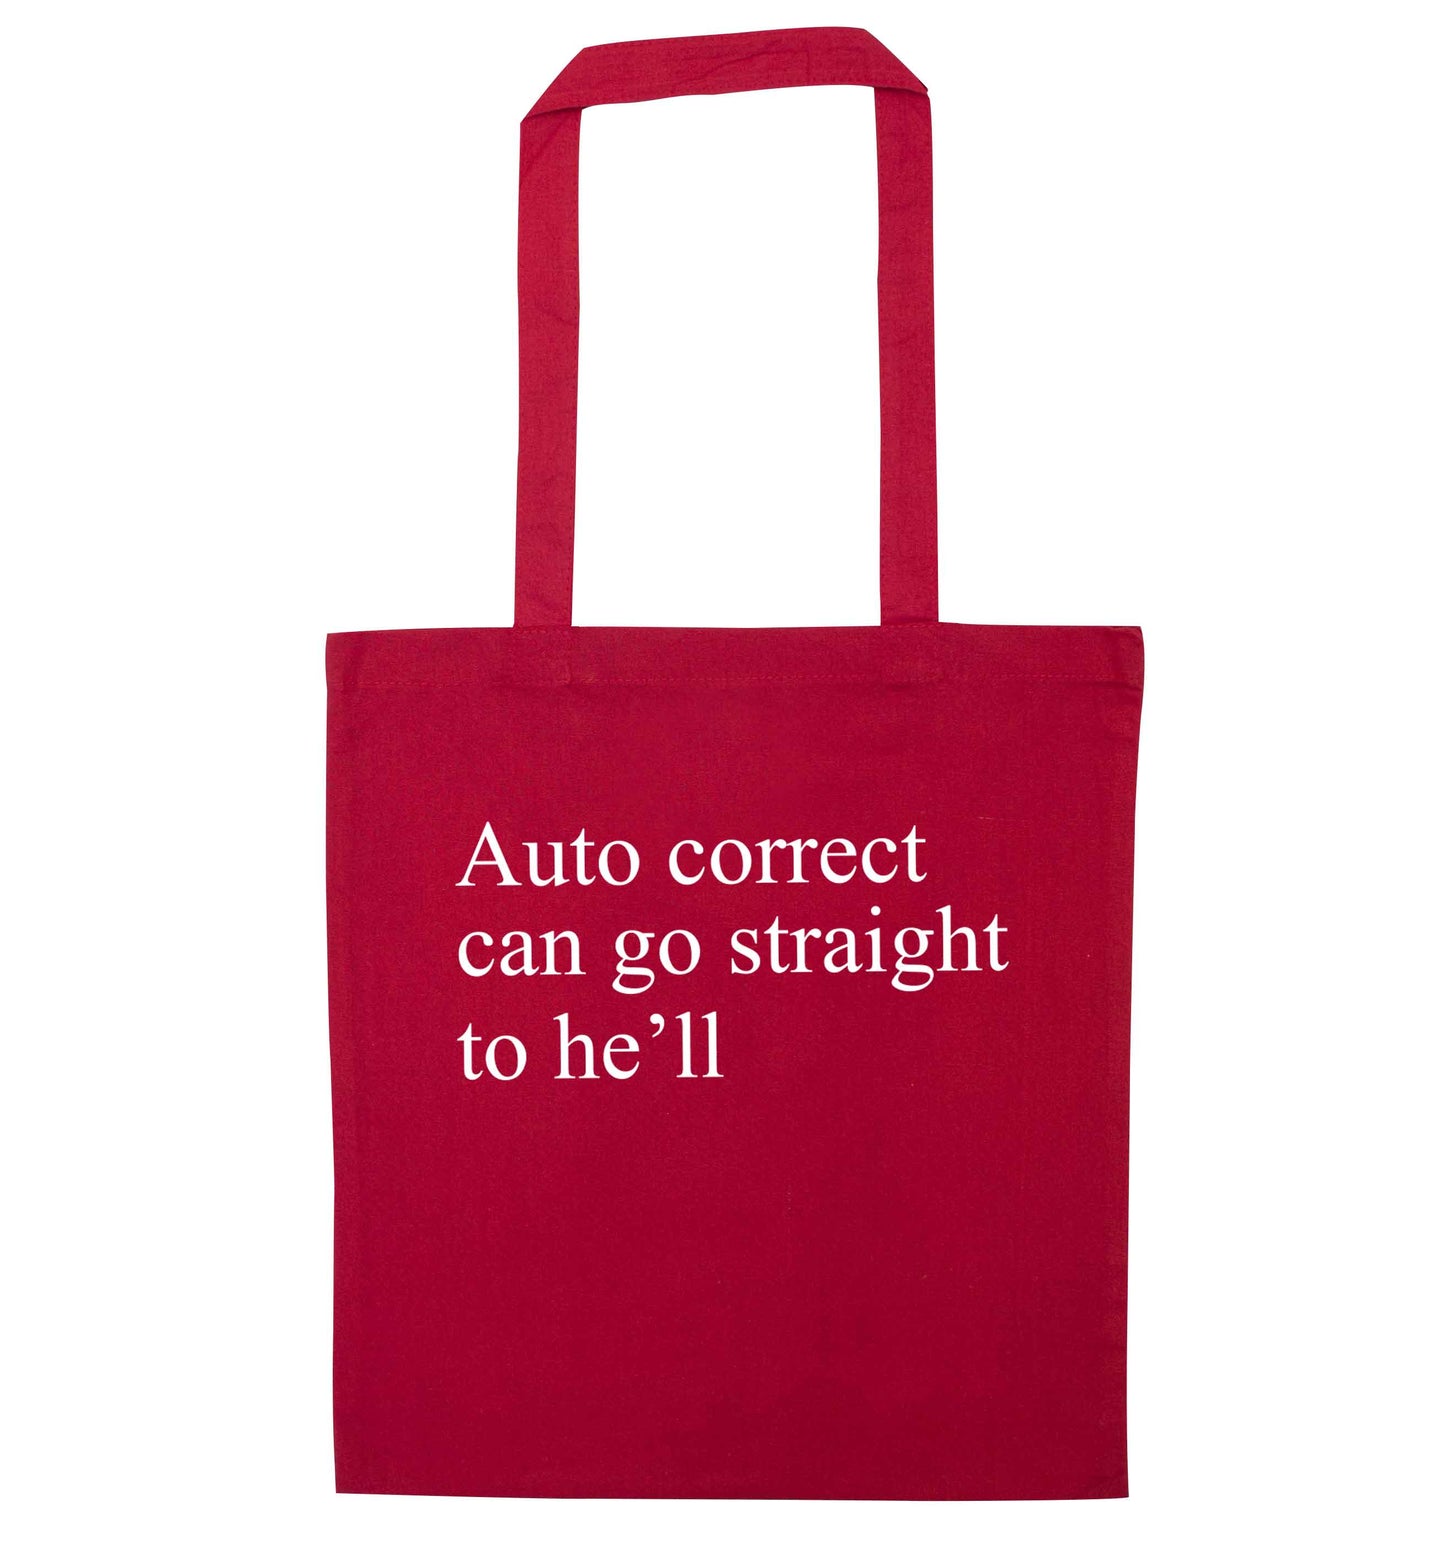 Auto correct can go straight to he'll red tote bag